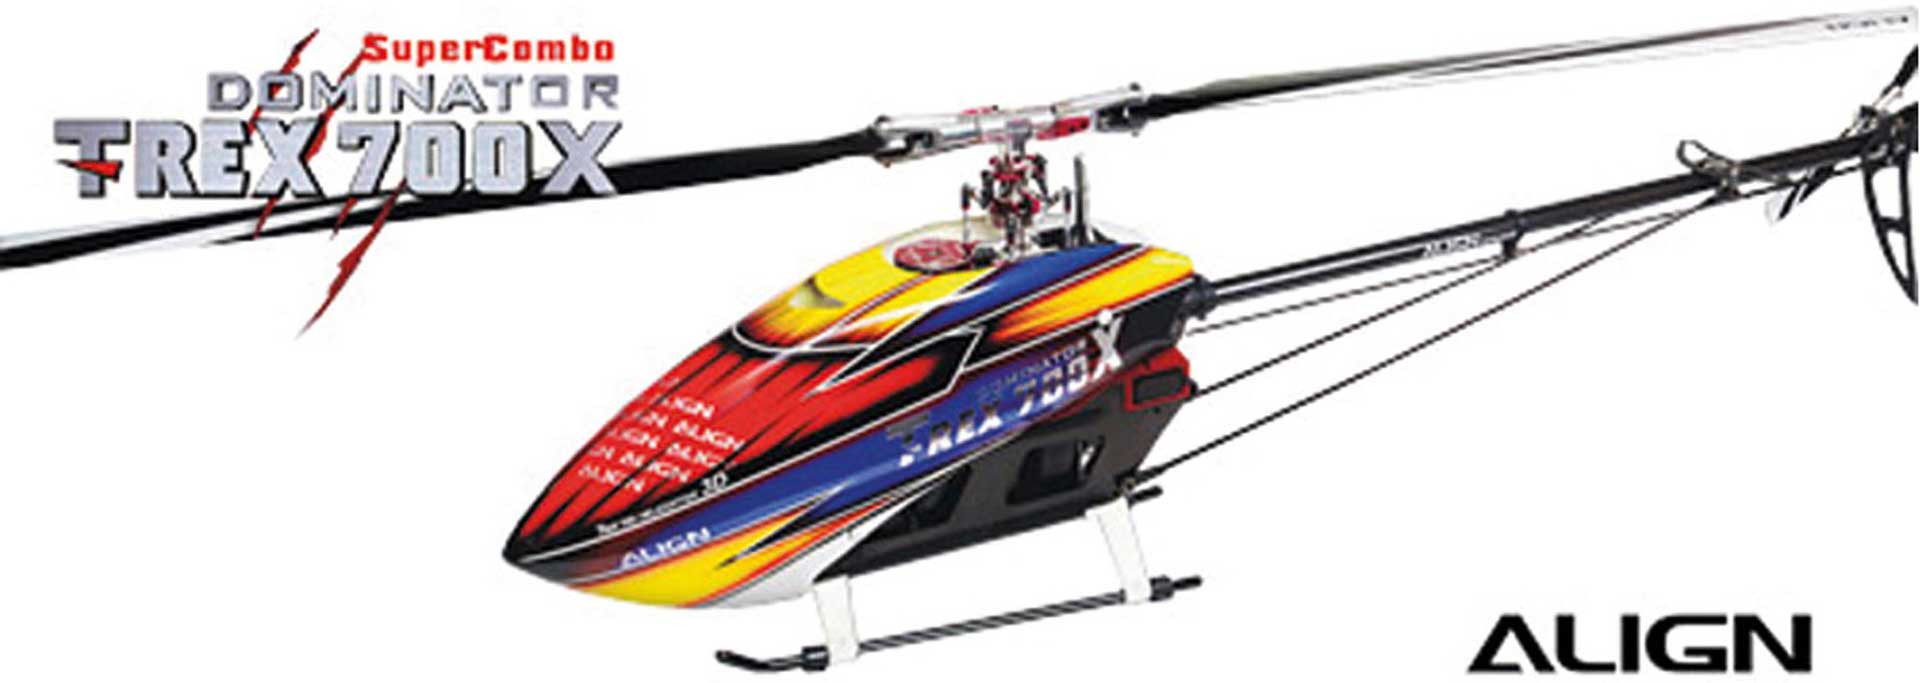 ALIGN T-REX 700X DOMINATOR SUPER COMBO +MB Helicopter